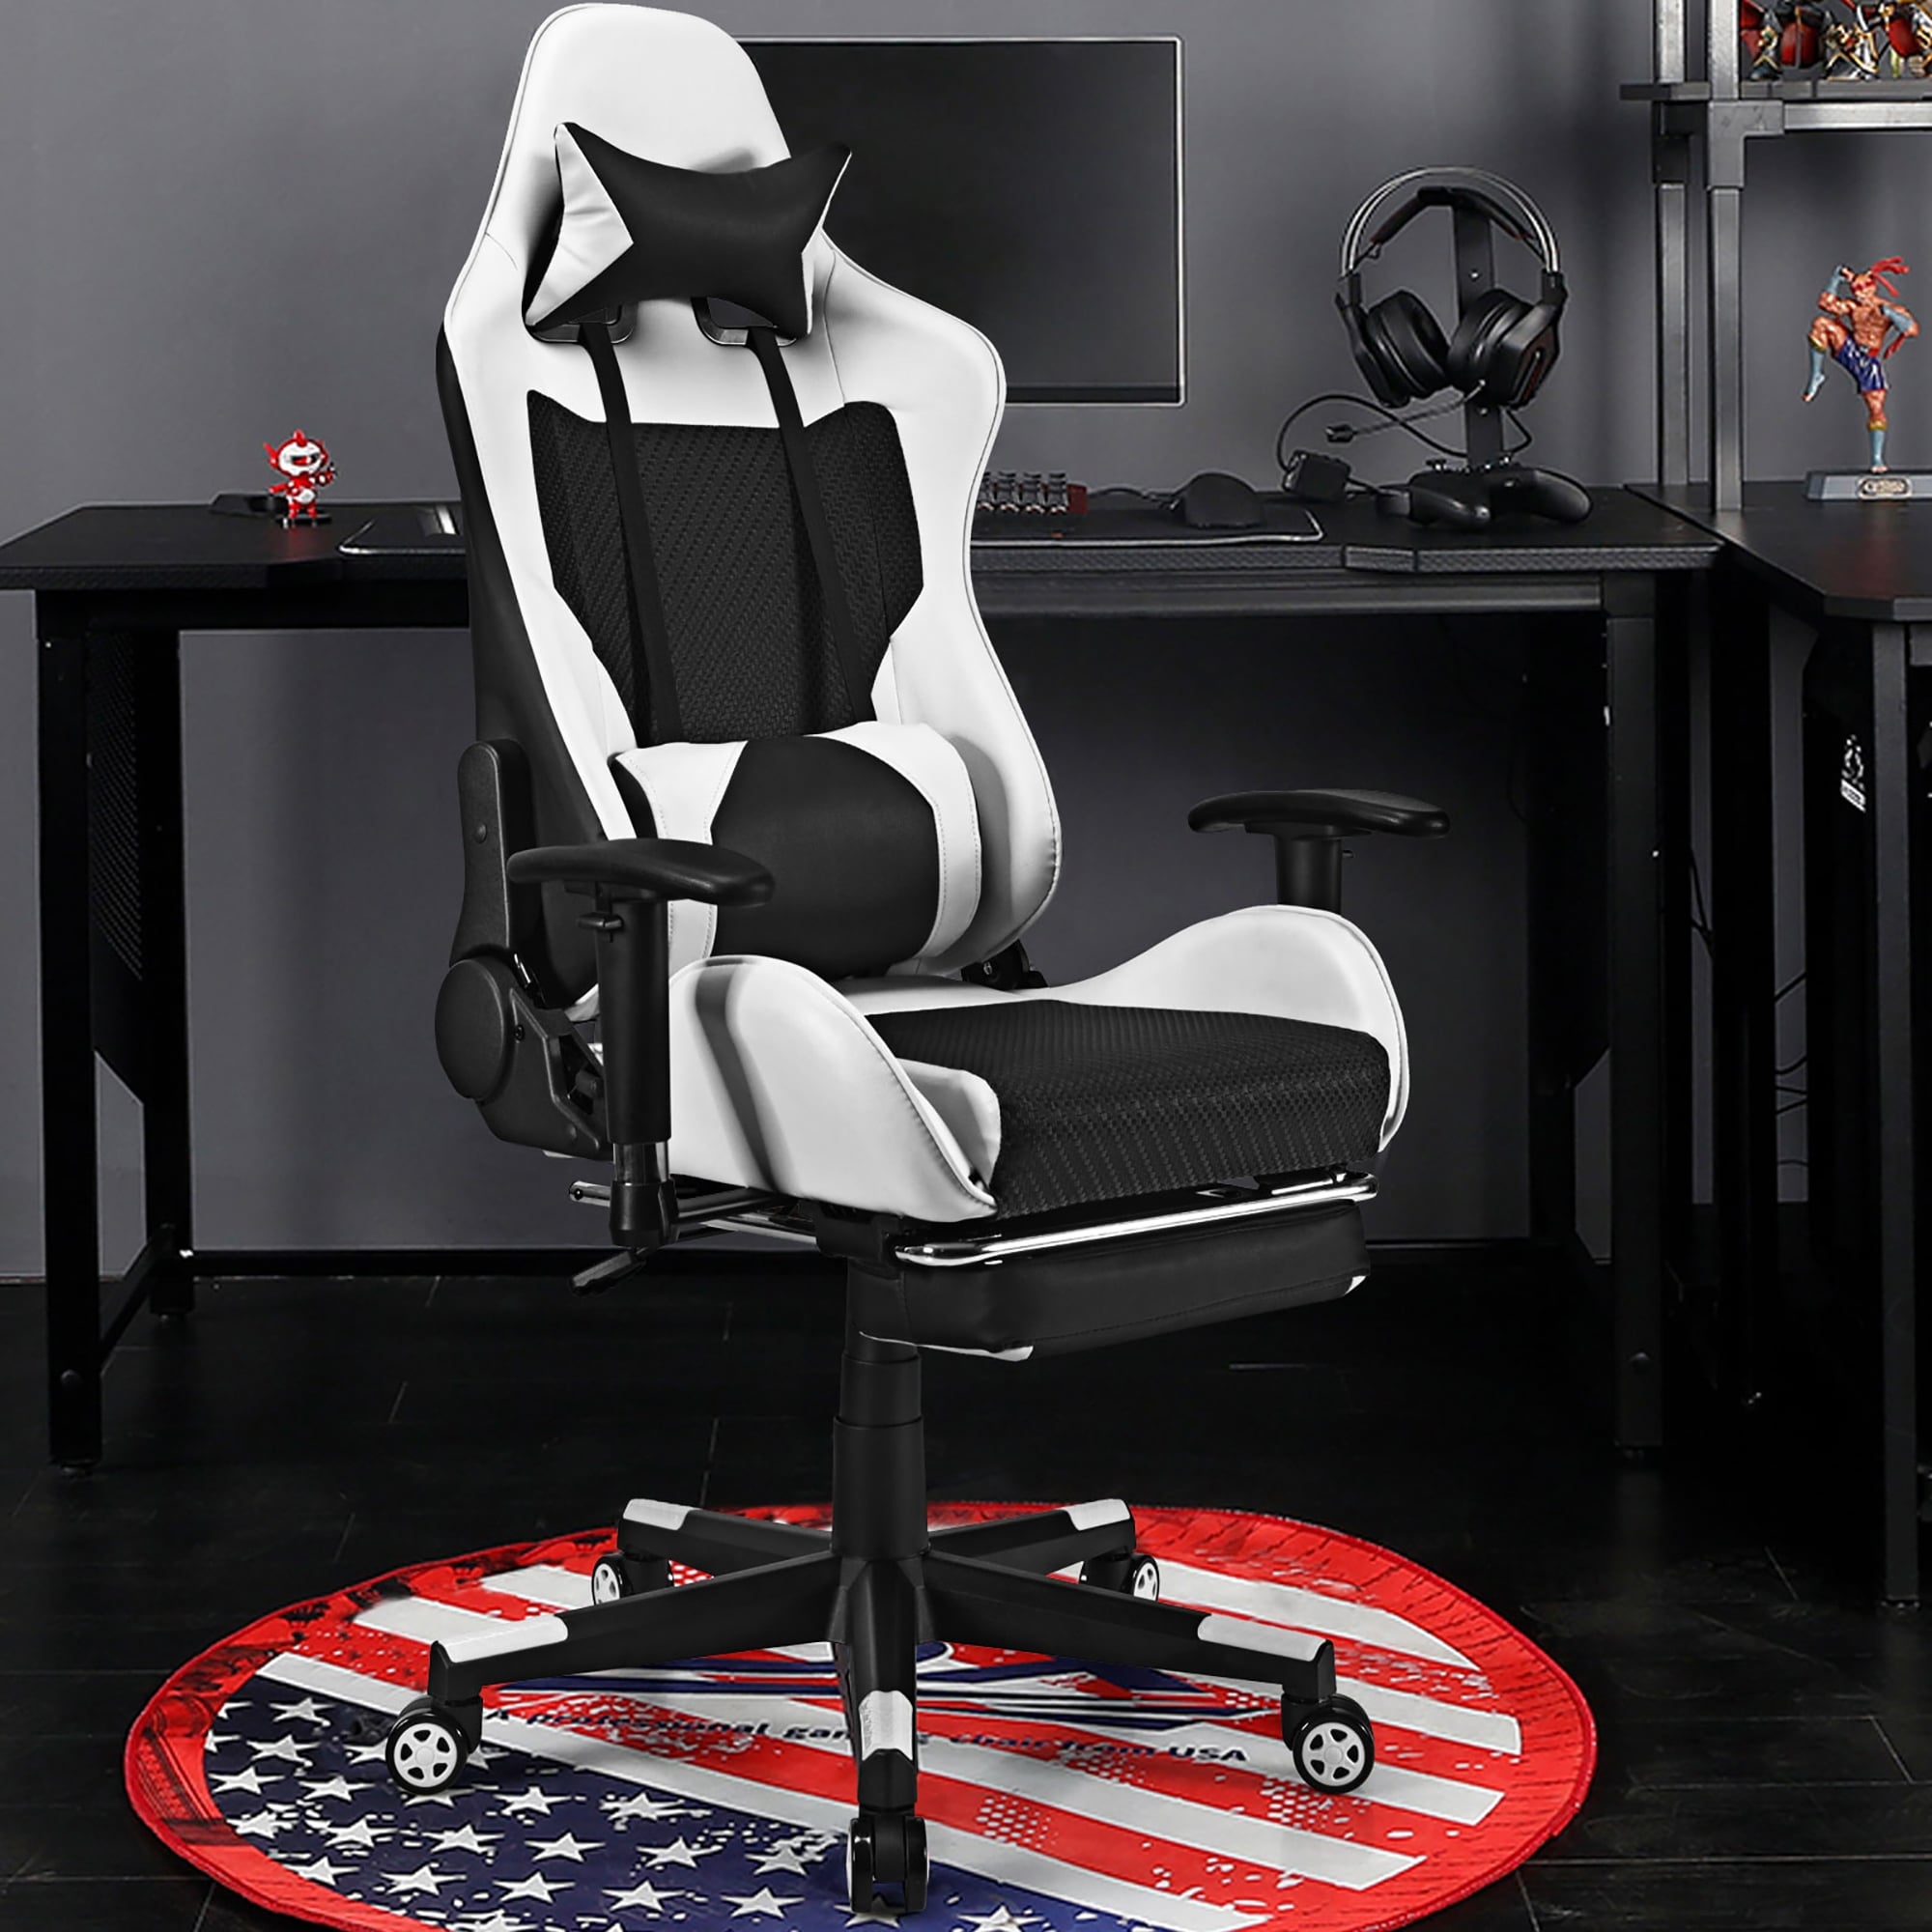 https://ak1.ostkcdn.com/images/products/is/images/direct/980c6d7e4944db6532bac6f1e08a98bc62c65b7f/Gaming-Chair-Massage-Office-Chair-Computer-Gaming-Racing-Chair.jpg